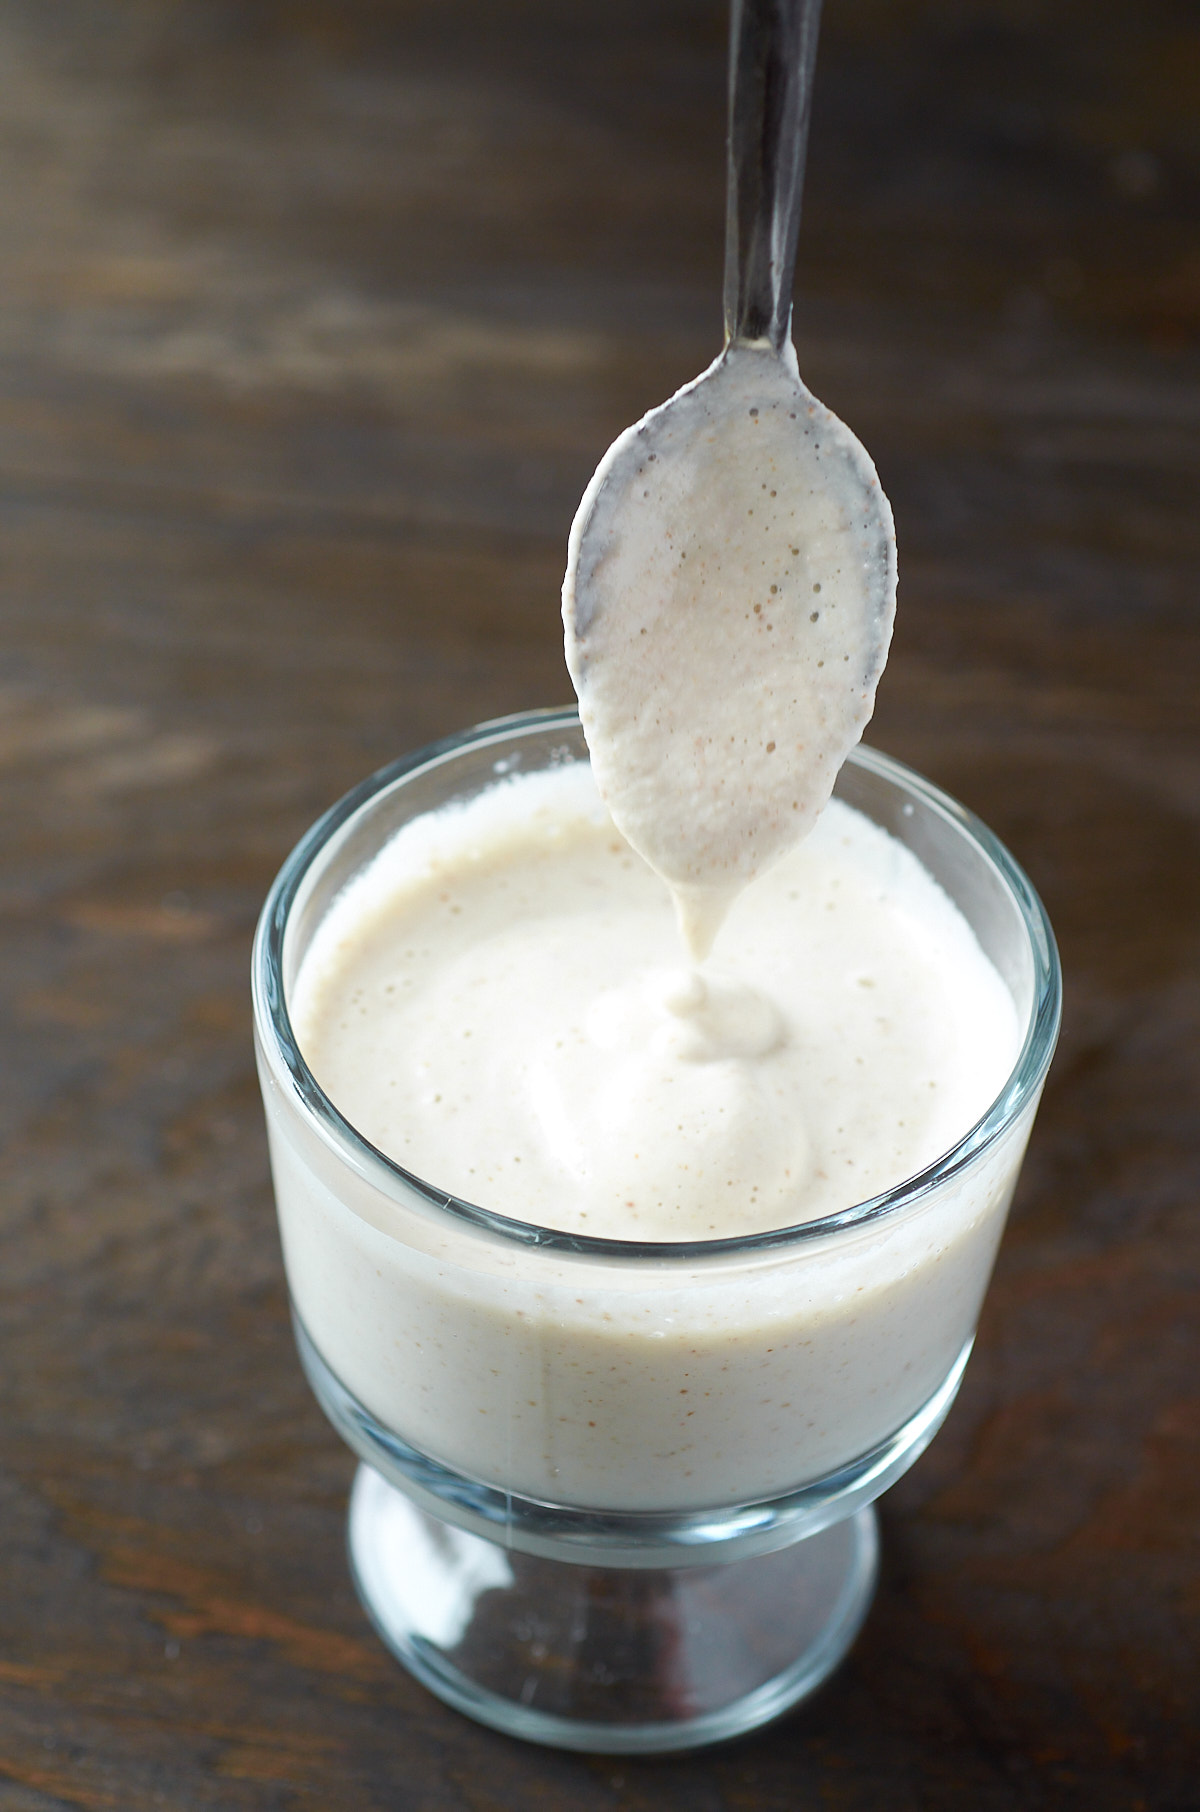 A metal spoon picking up a dollop of almond crema from a glass.